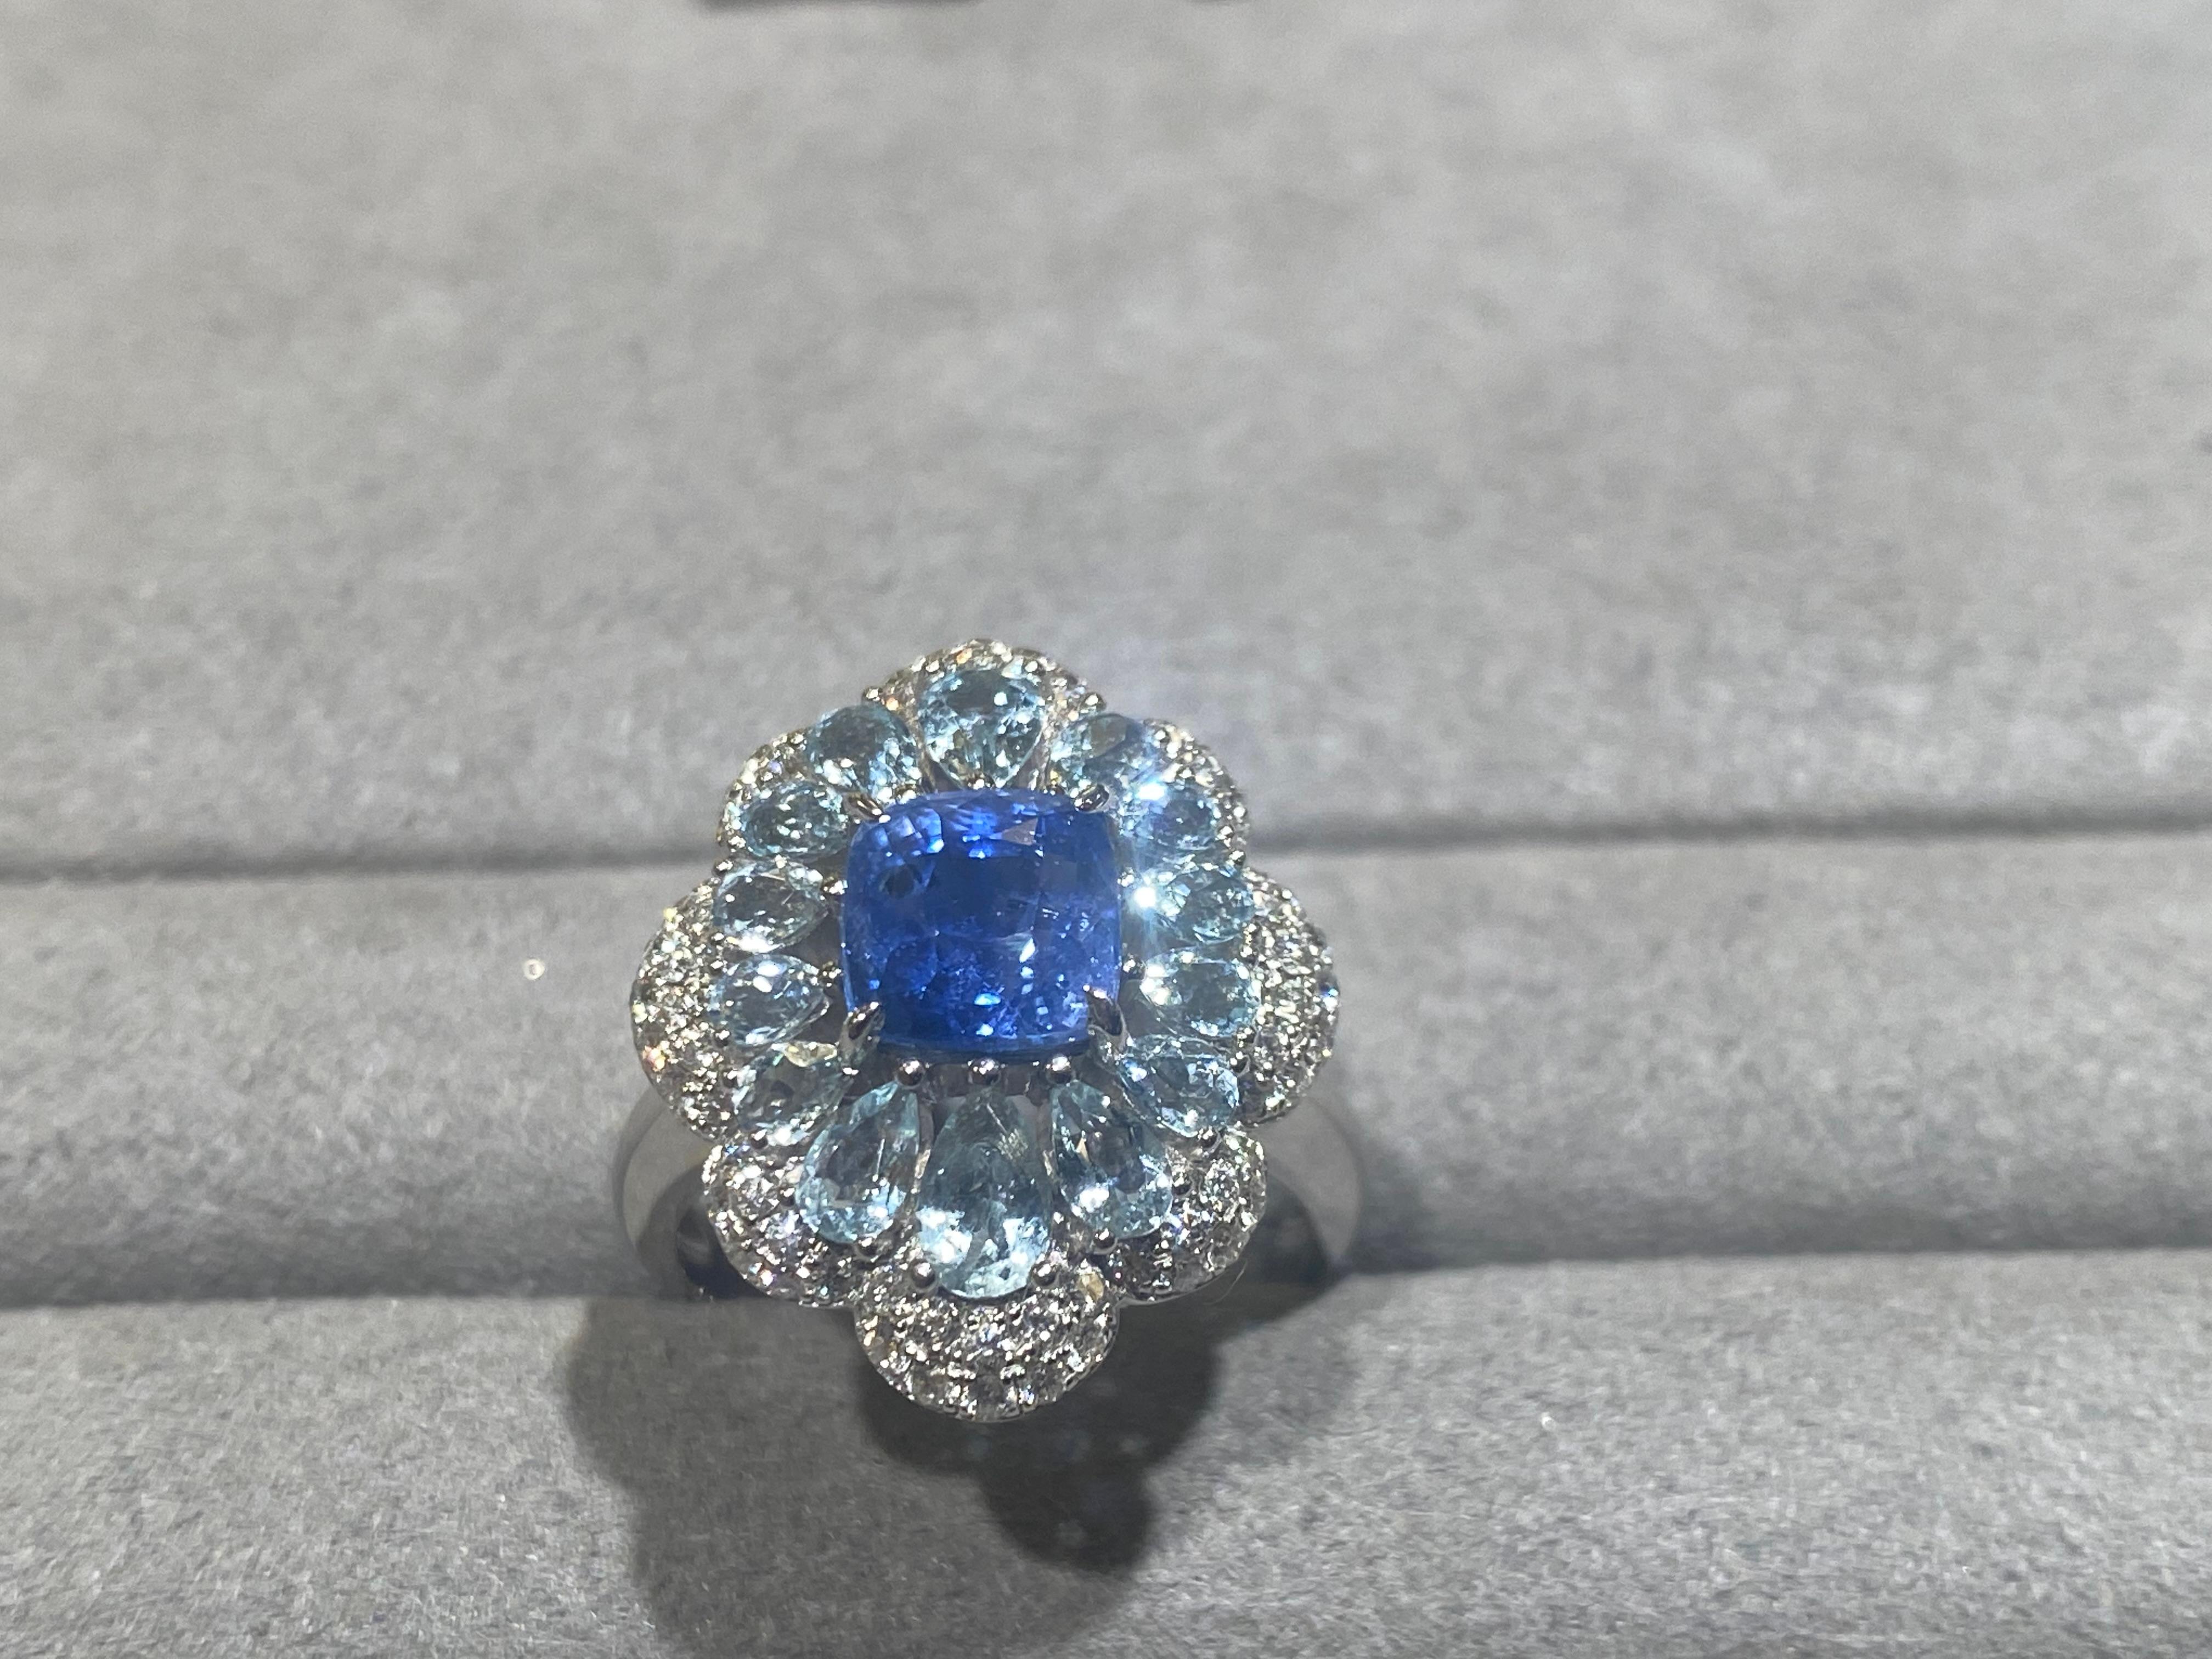 For Sale:  EOSTRE Unheated Sapphire, Aquamarine and Diamond Ring in 18K White Gold 2